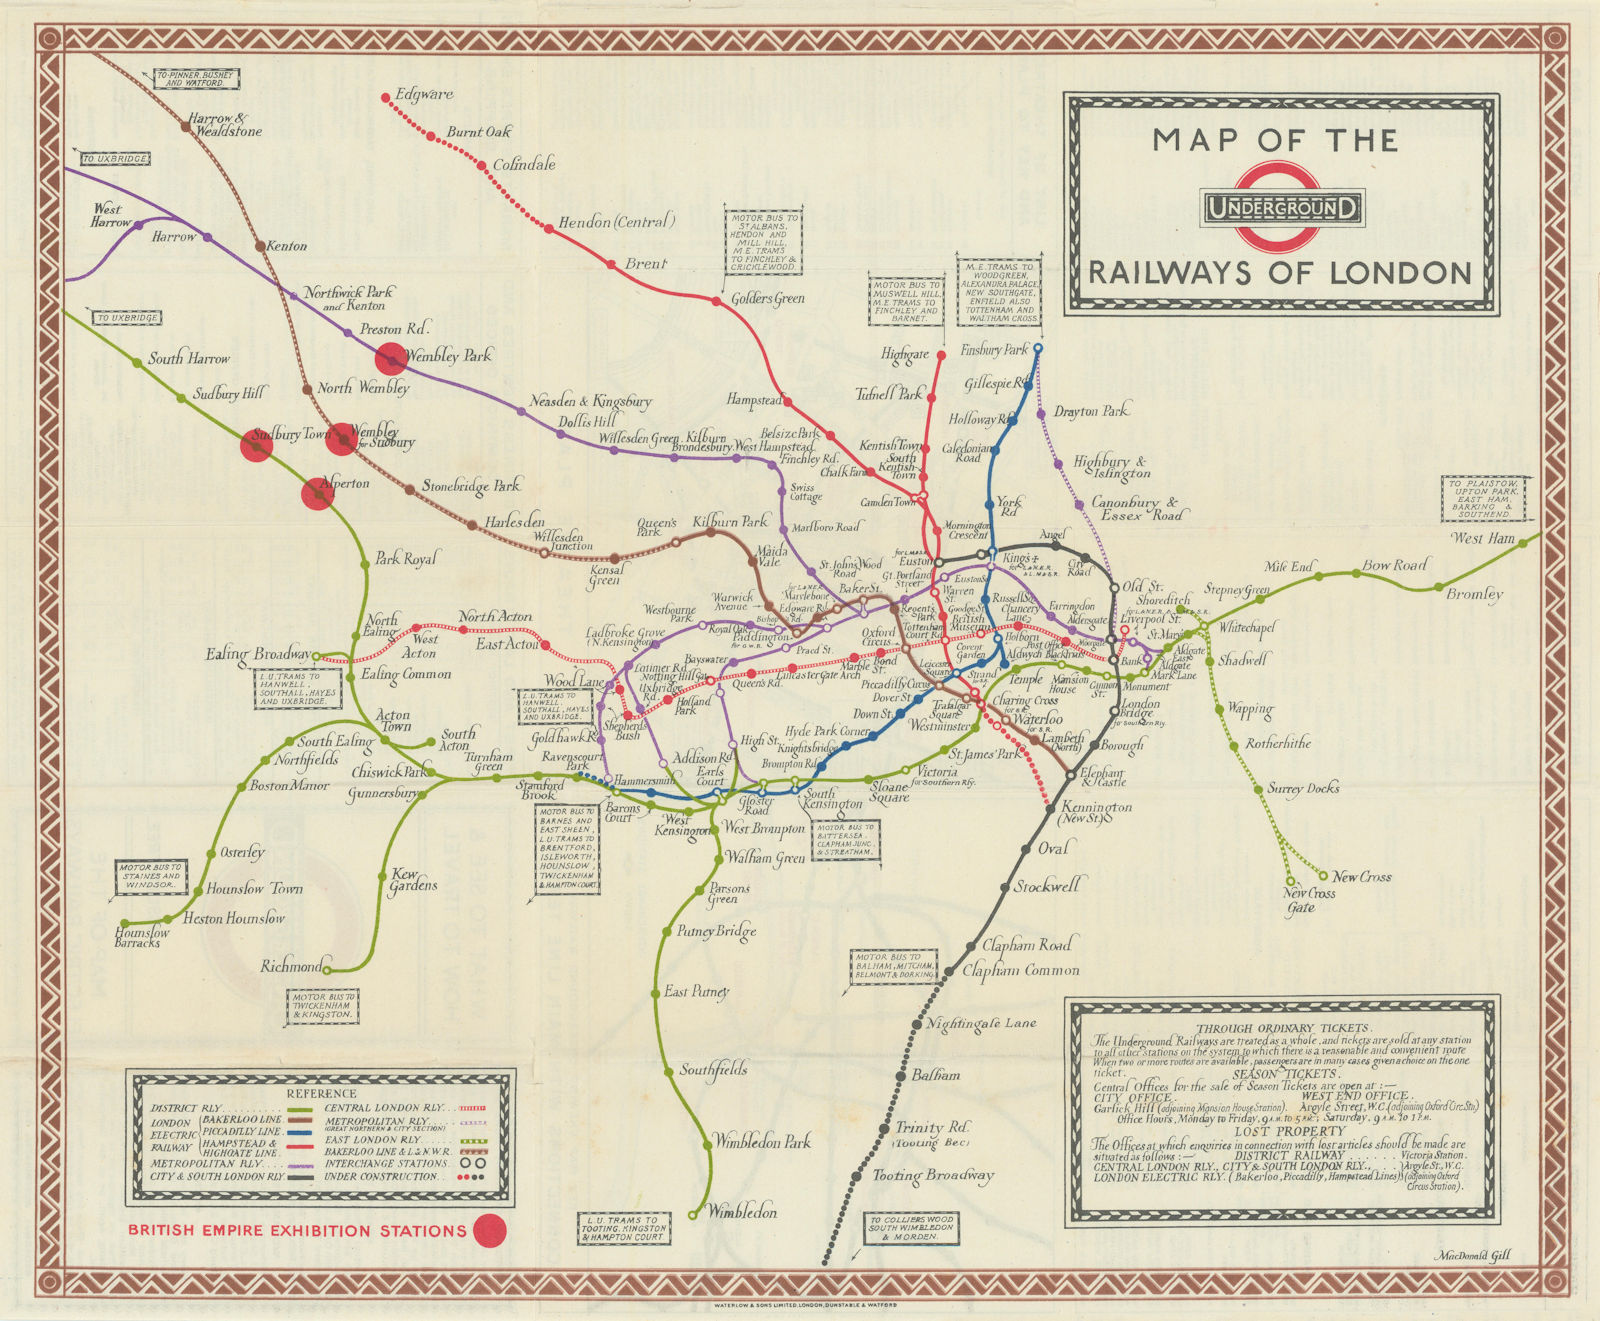 Map of the Underground Railways of London by Macdonald Gill. November 1923